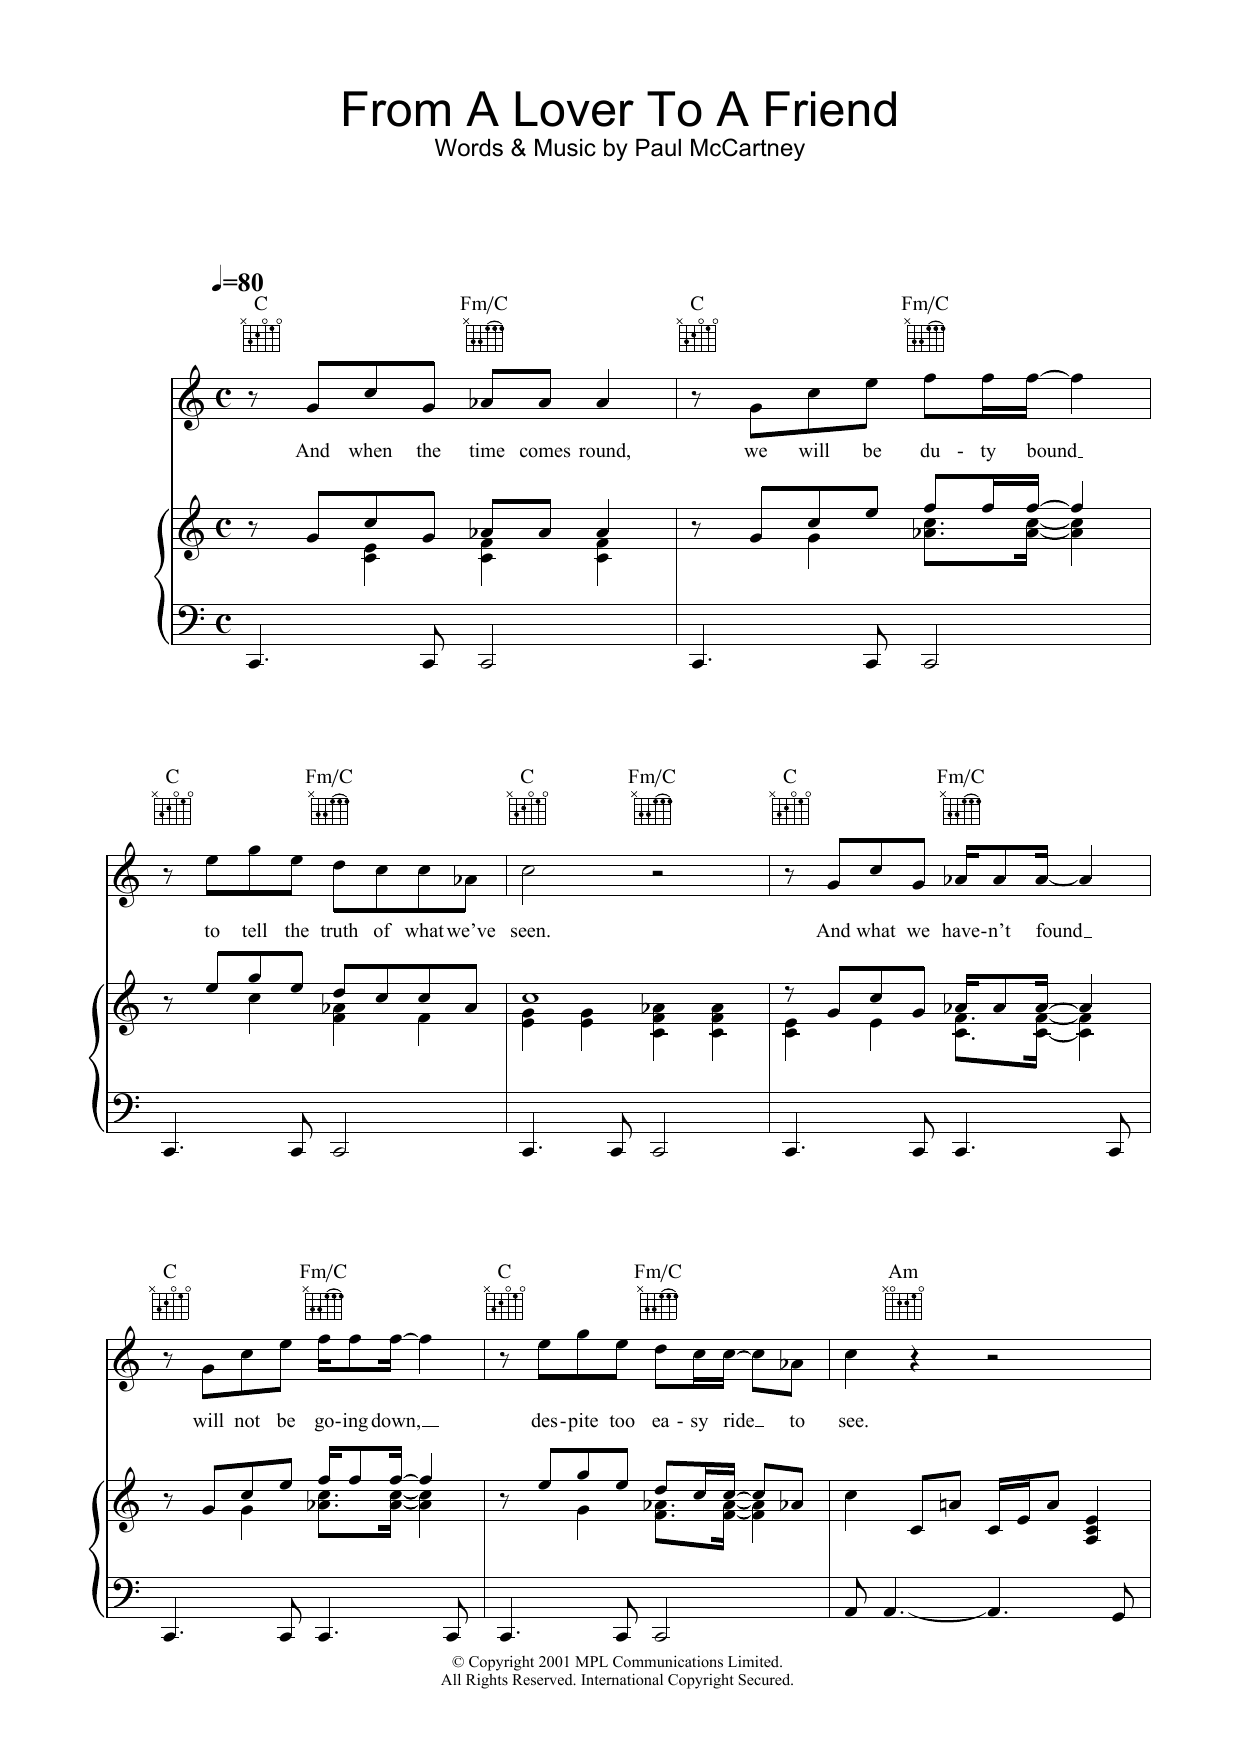 Download Paul McCartney From A Lover To A Friend Sheet Music